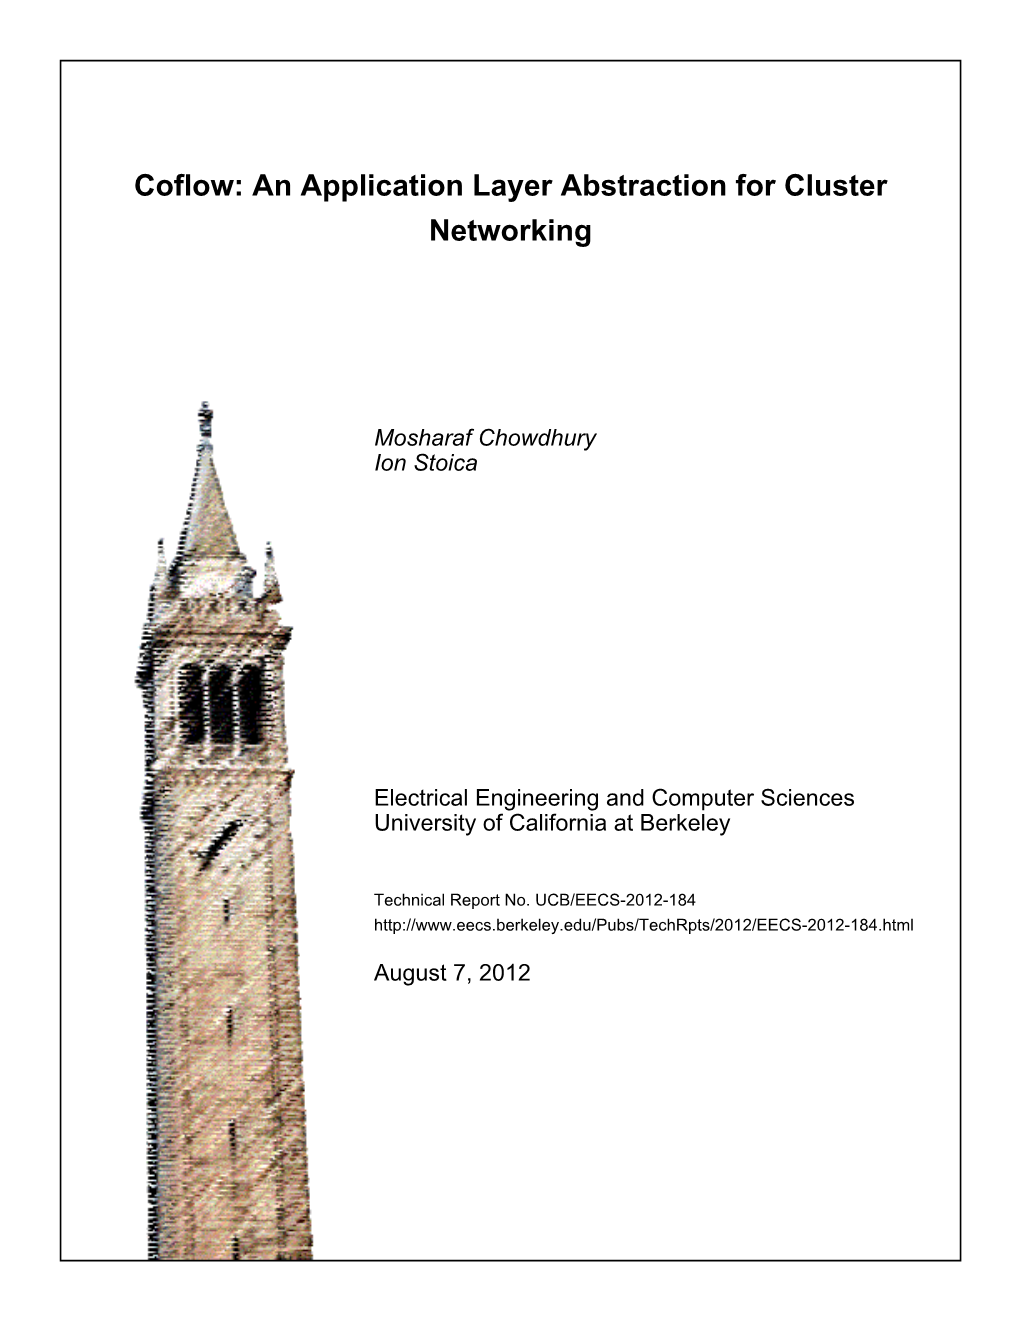 Coflow: an Application Layer Abstraction for Cluster Networking